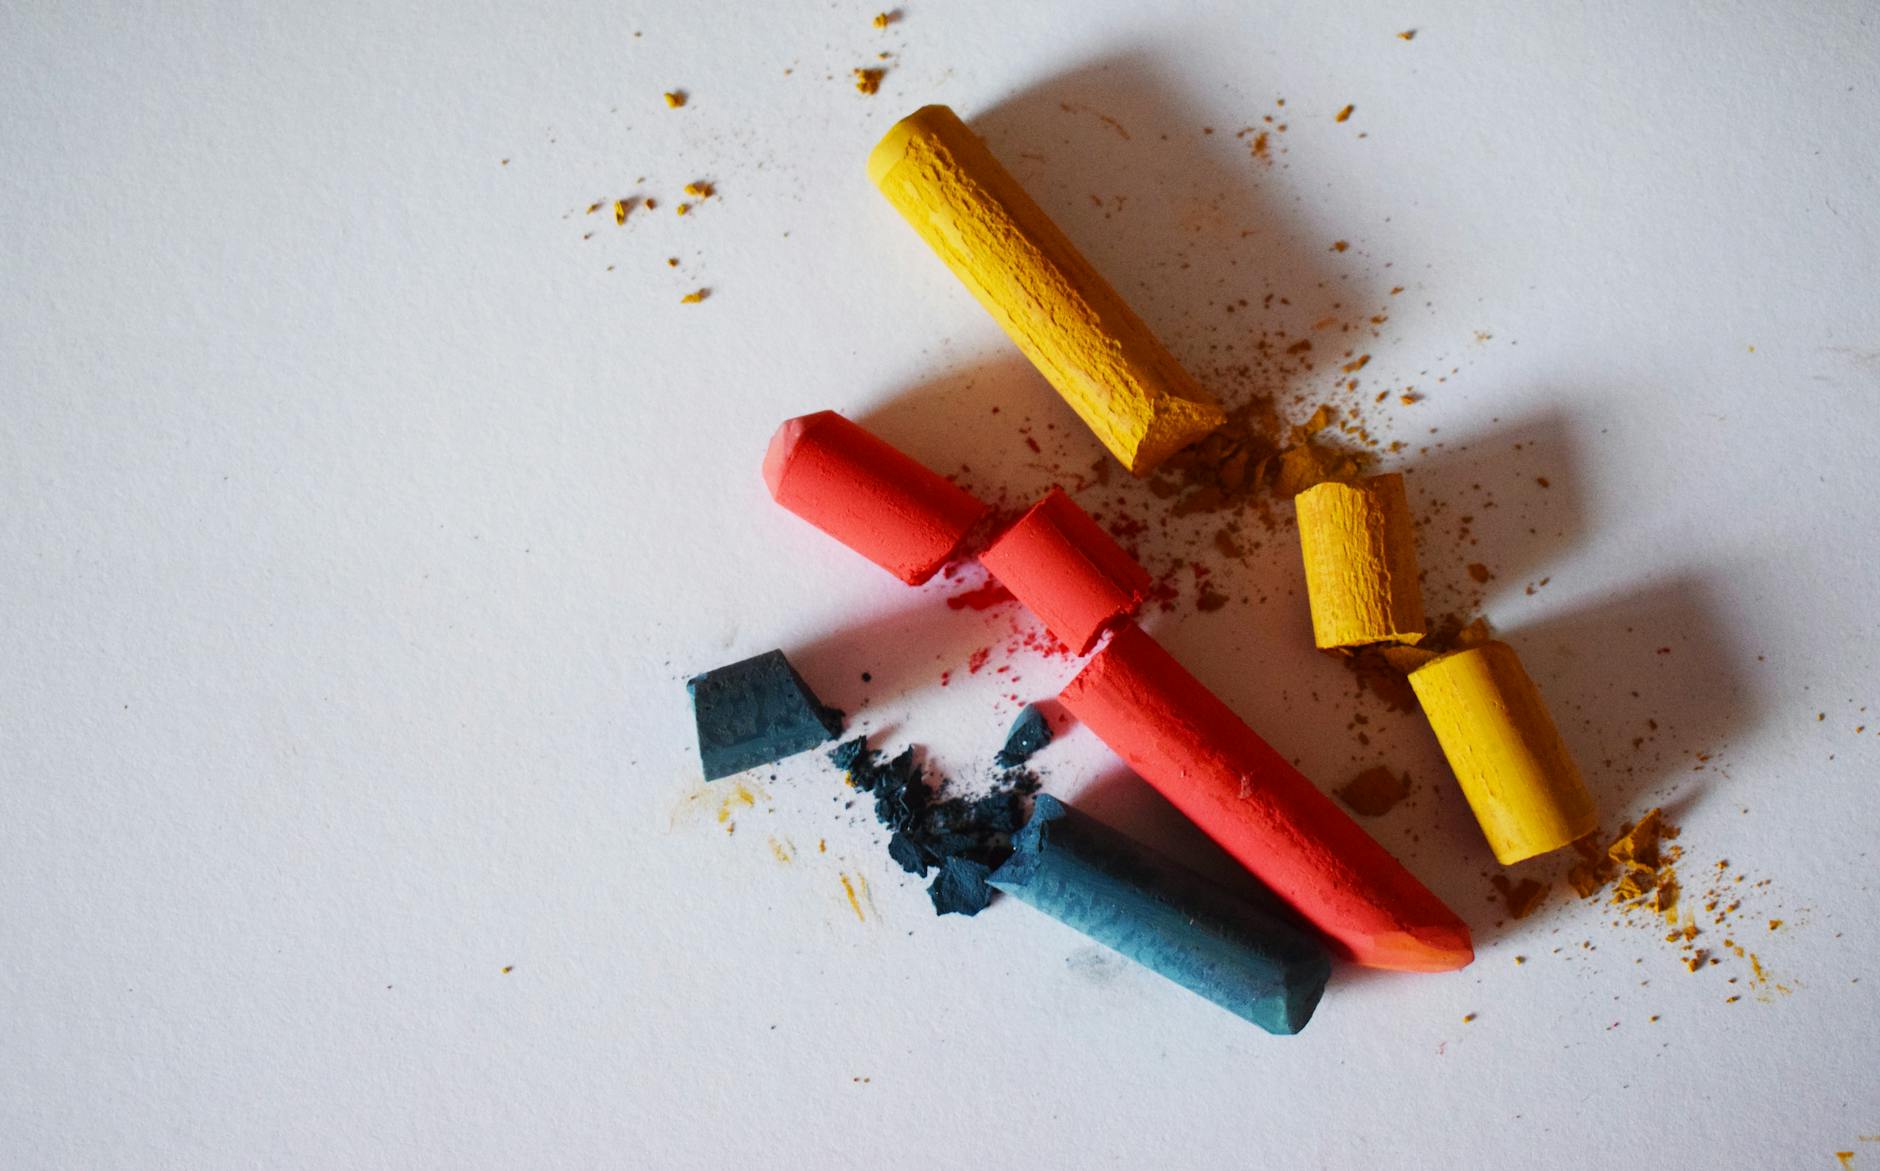 Broken chalk is still chalk.^[[Image](https://www.pexels.com/photo/blue-red-and-yellow-chalk-1107495/) from [Pexels](https://www.pexels.com/)]